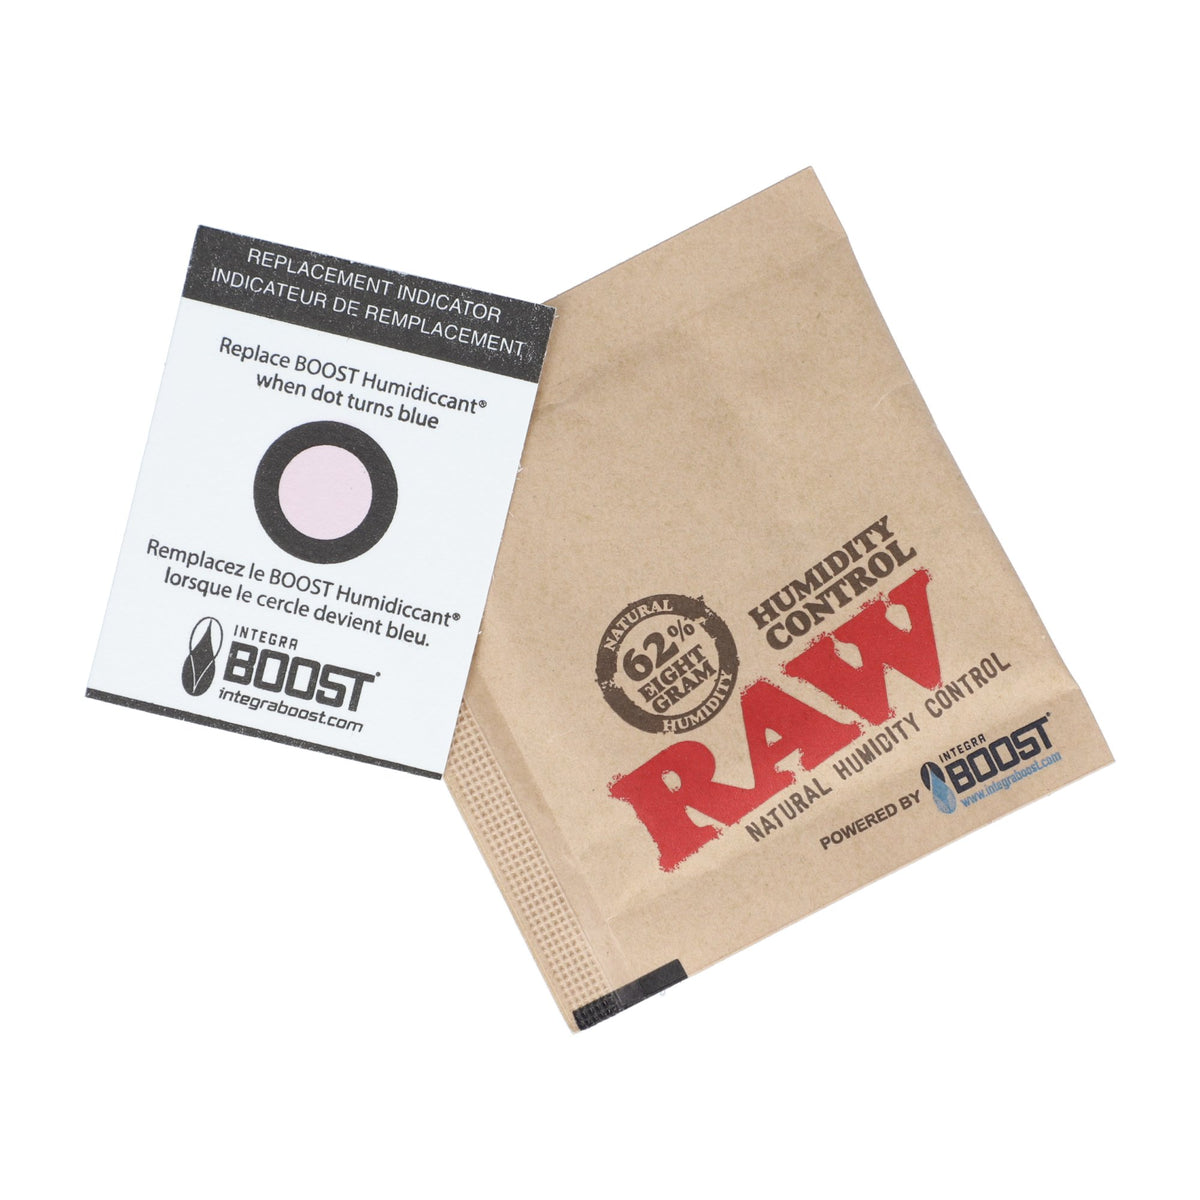 RAW 62% Humidity Control Pack 8-67 gram Accessories esd-official